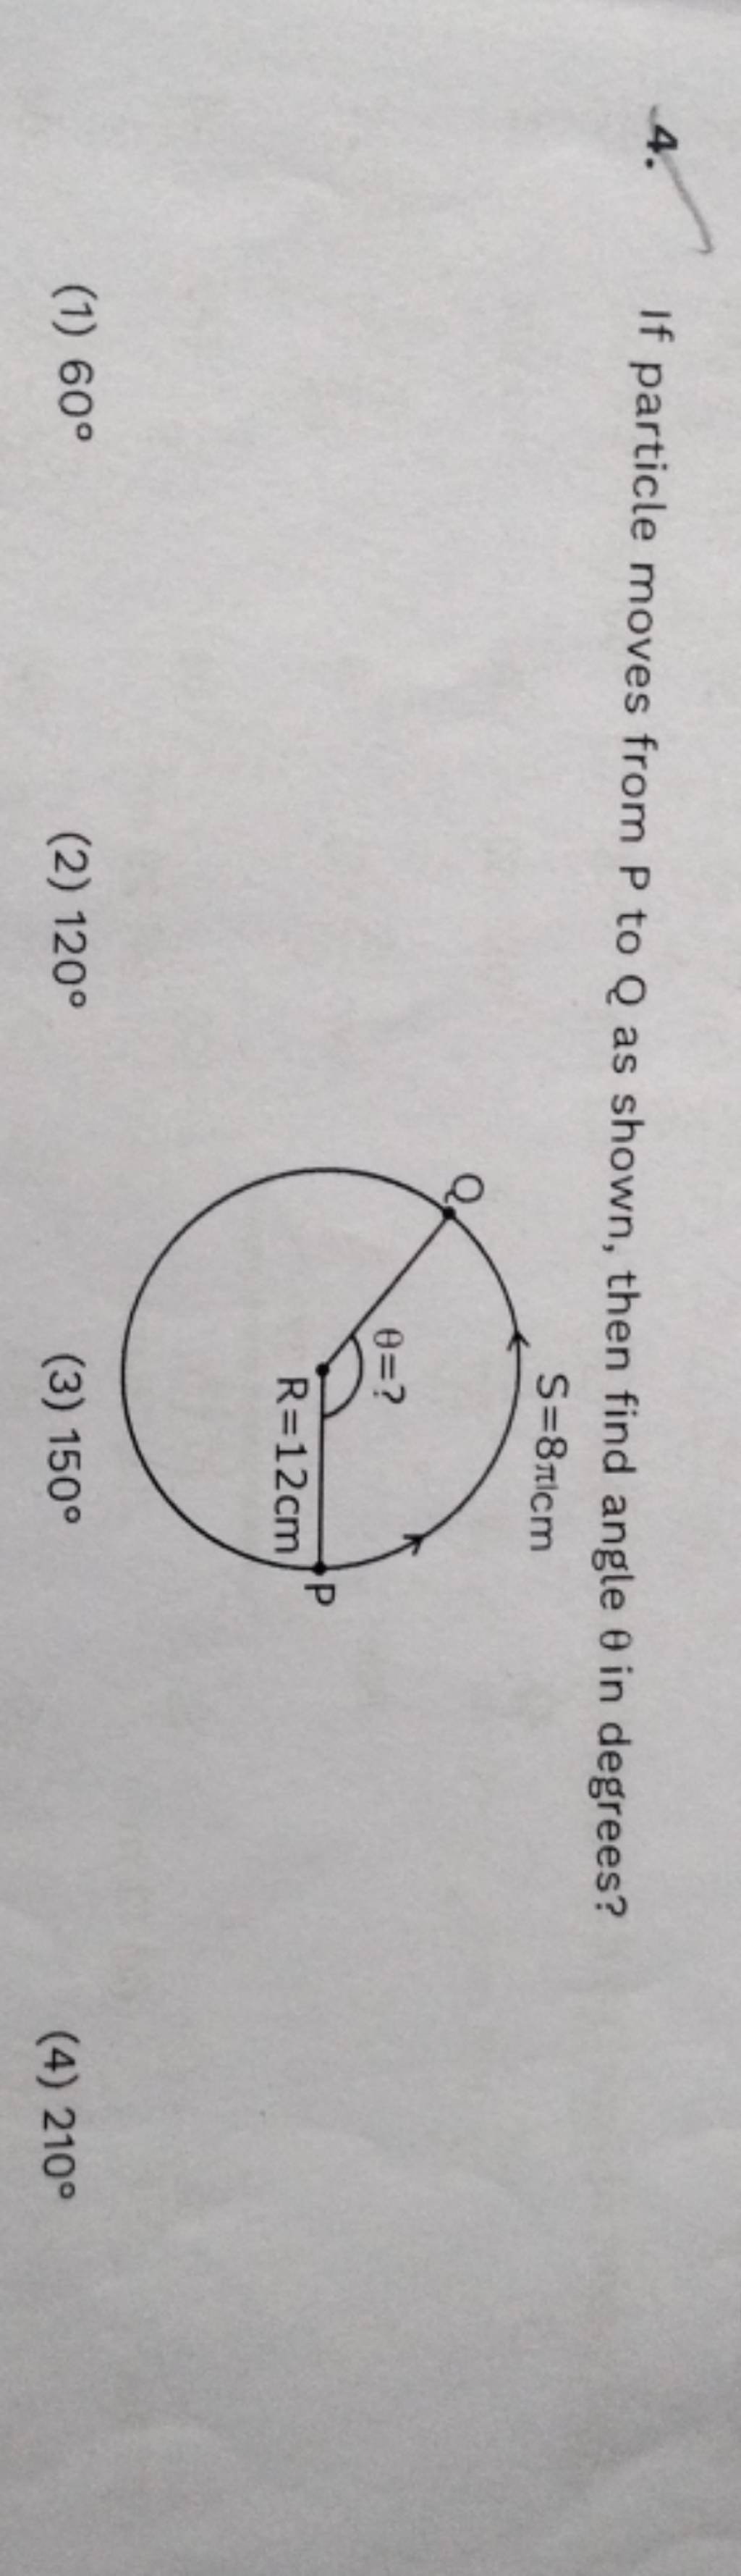 If particle moves from P to Q as shown, then find angle θ in degrees?